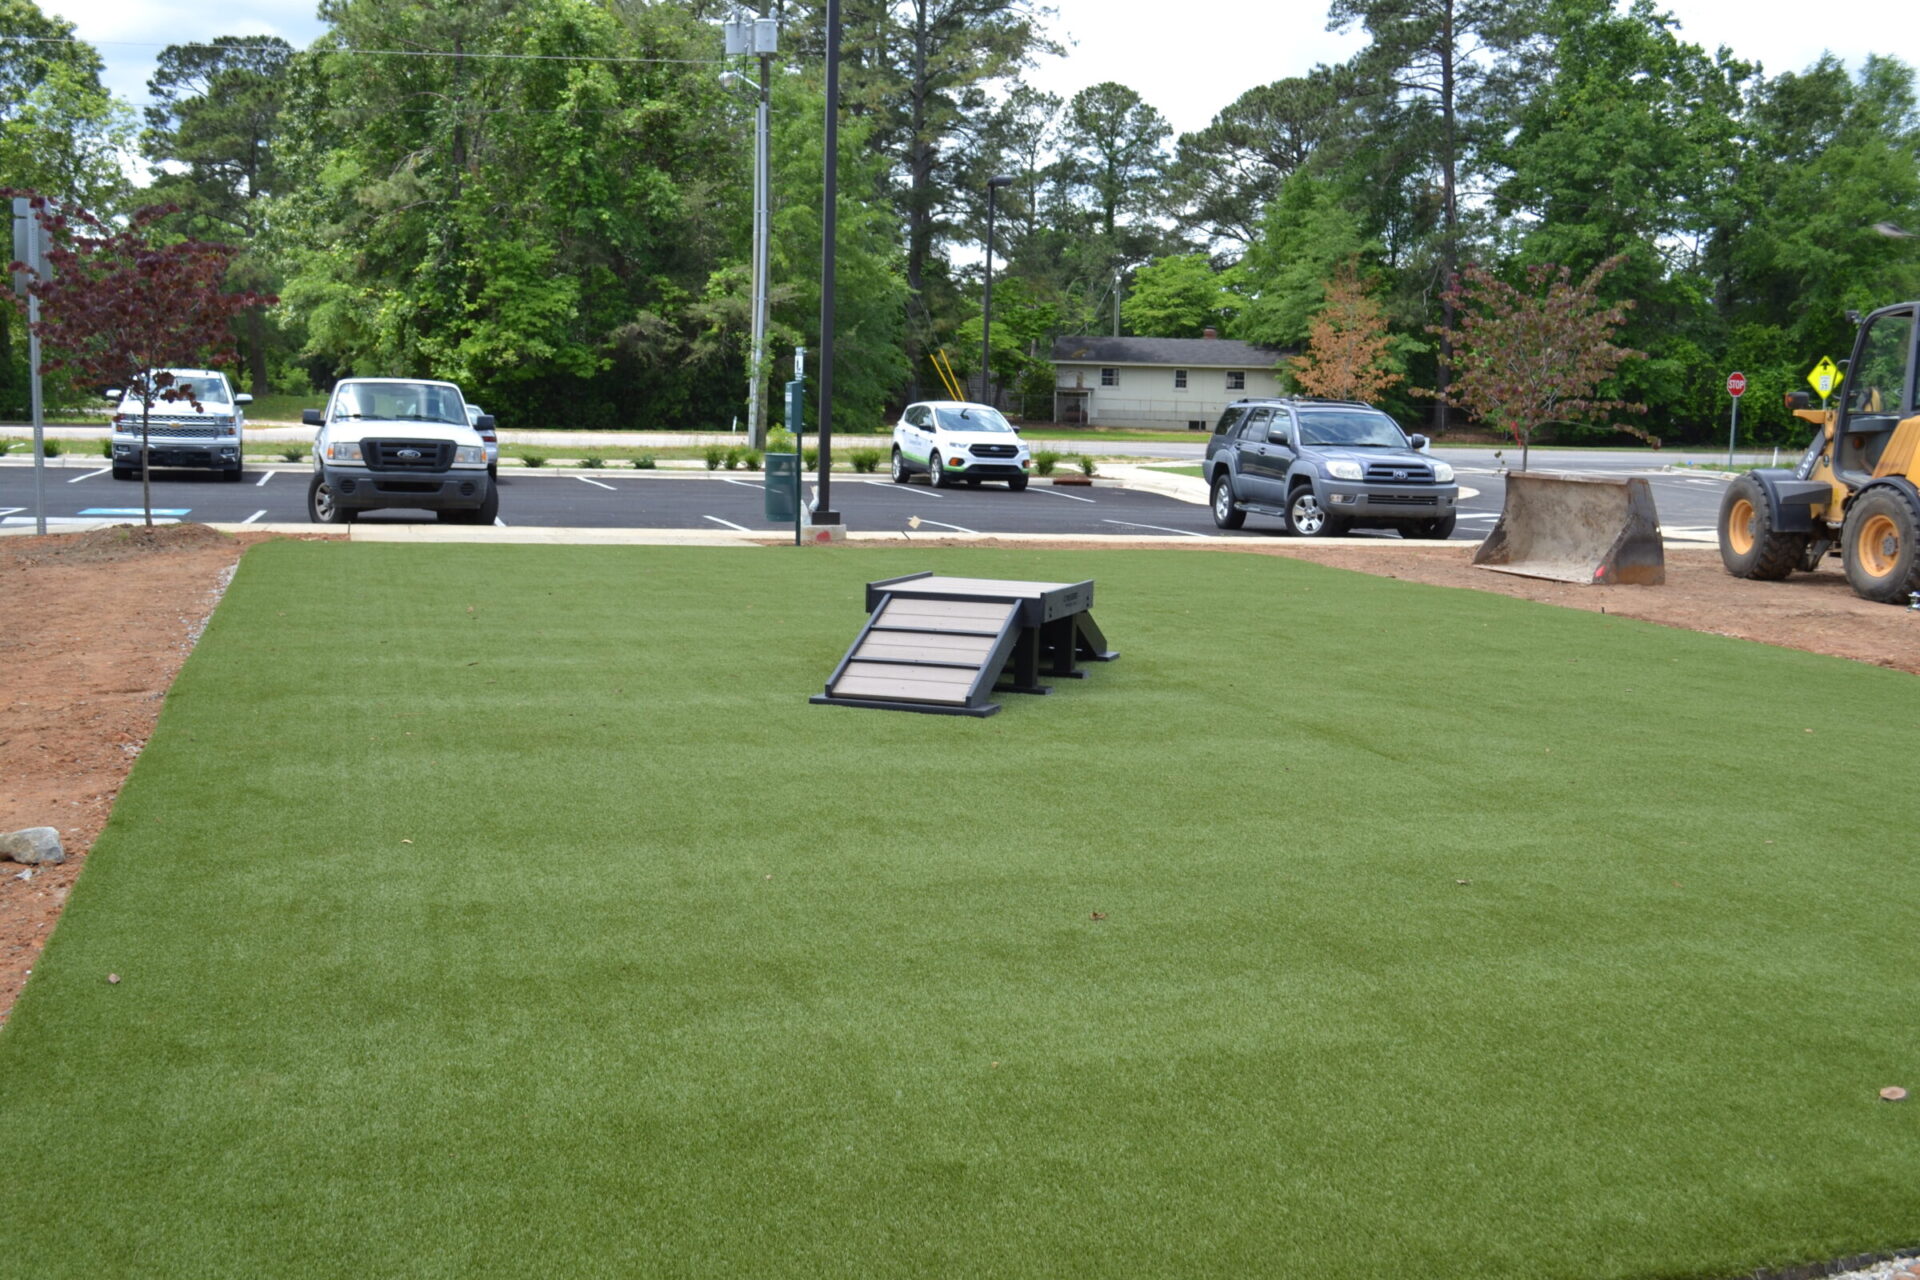 This image depicts an area with artificial grass, adjacent to a parking lot with cars, next to a street. A plyometric box is visible upfront.